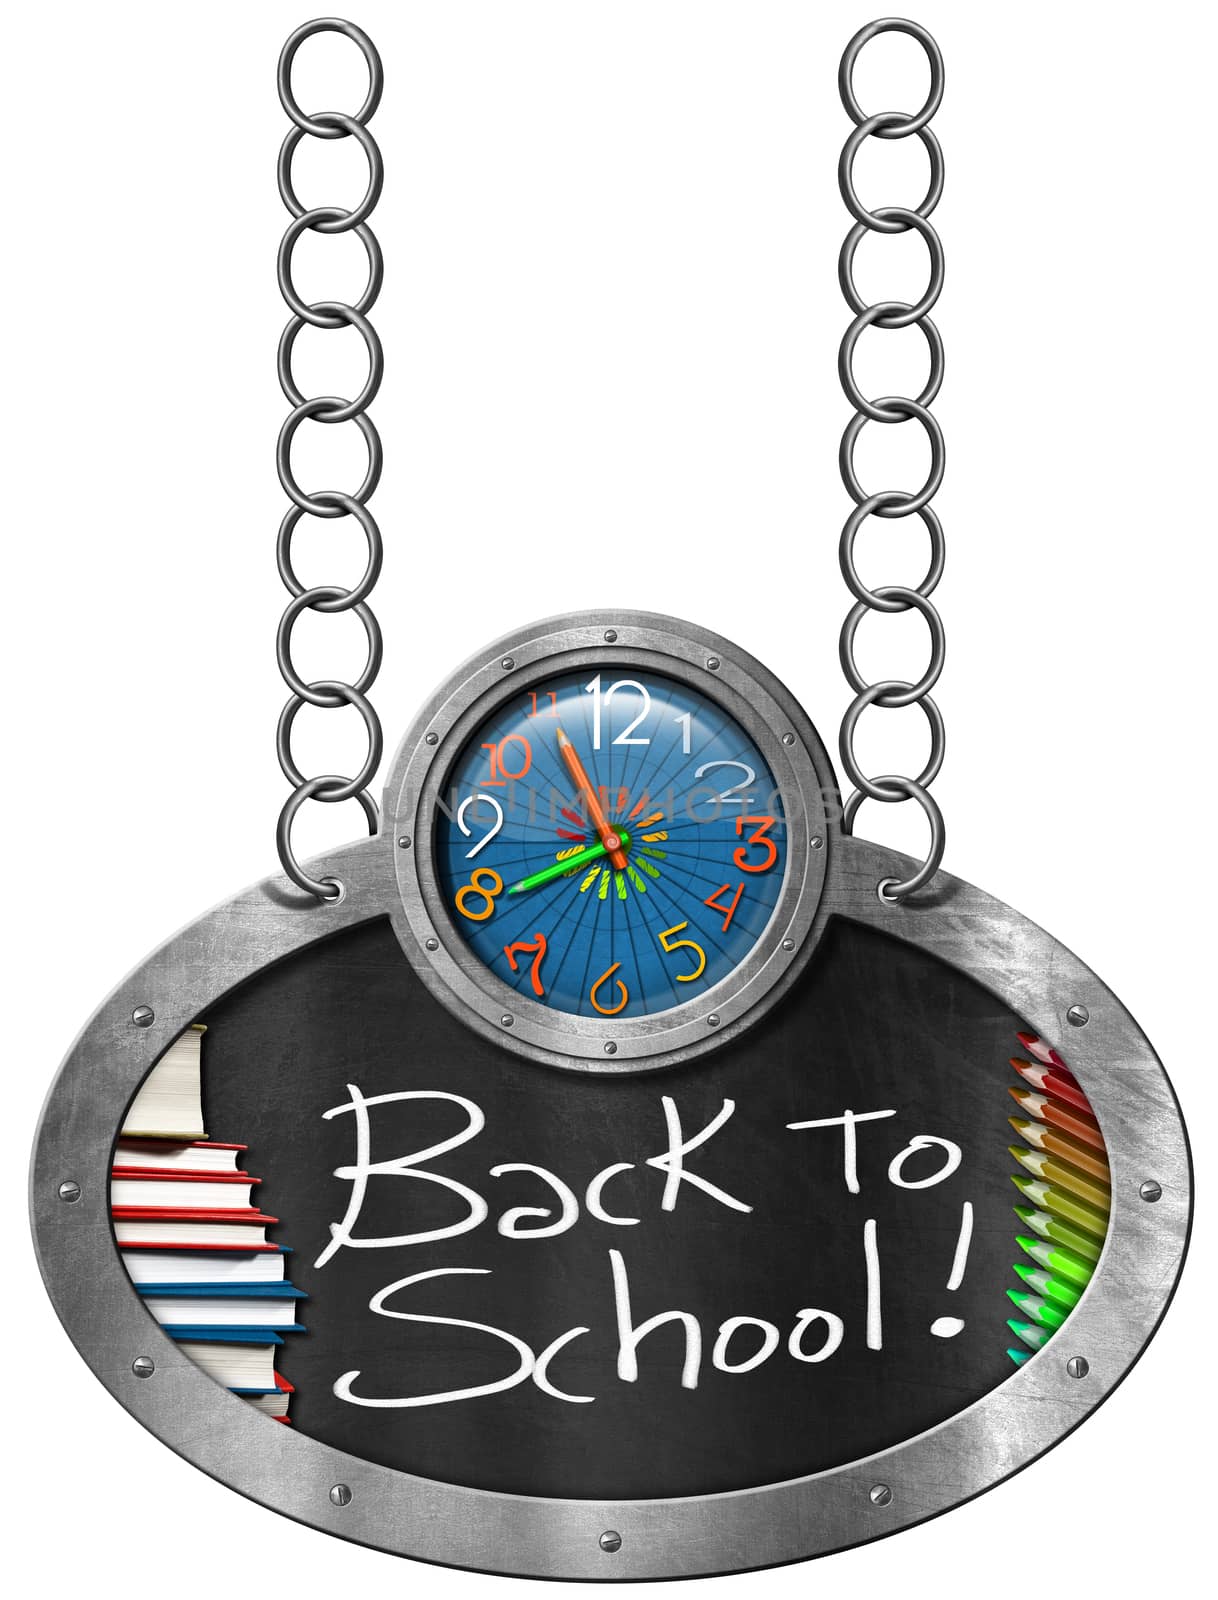 Oval blackboard with a colorful clock, text Back to School, books and colored pencils. Hanging from a chain and isolated on white background